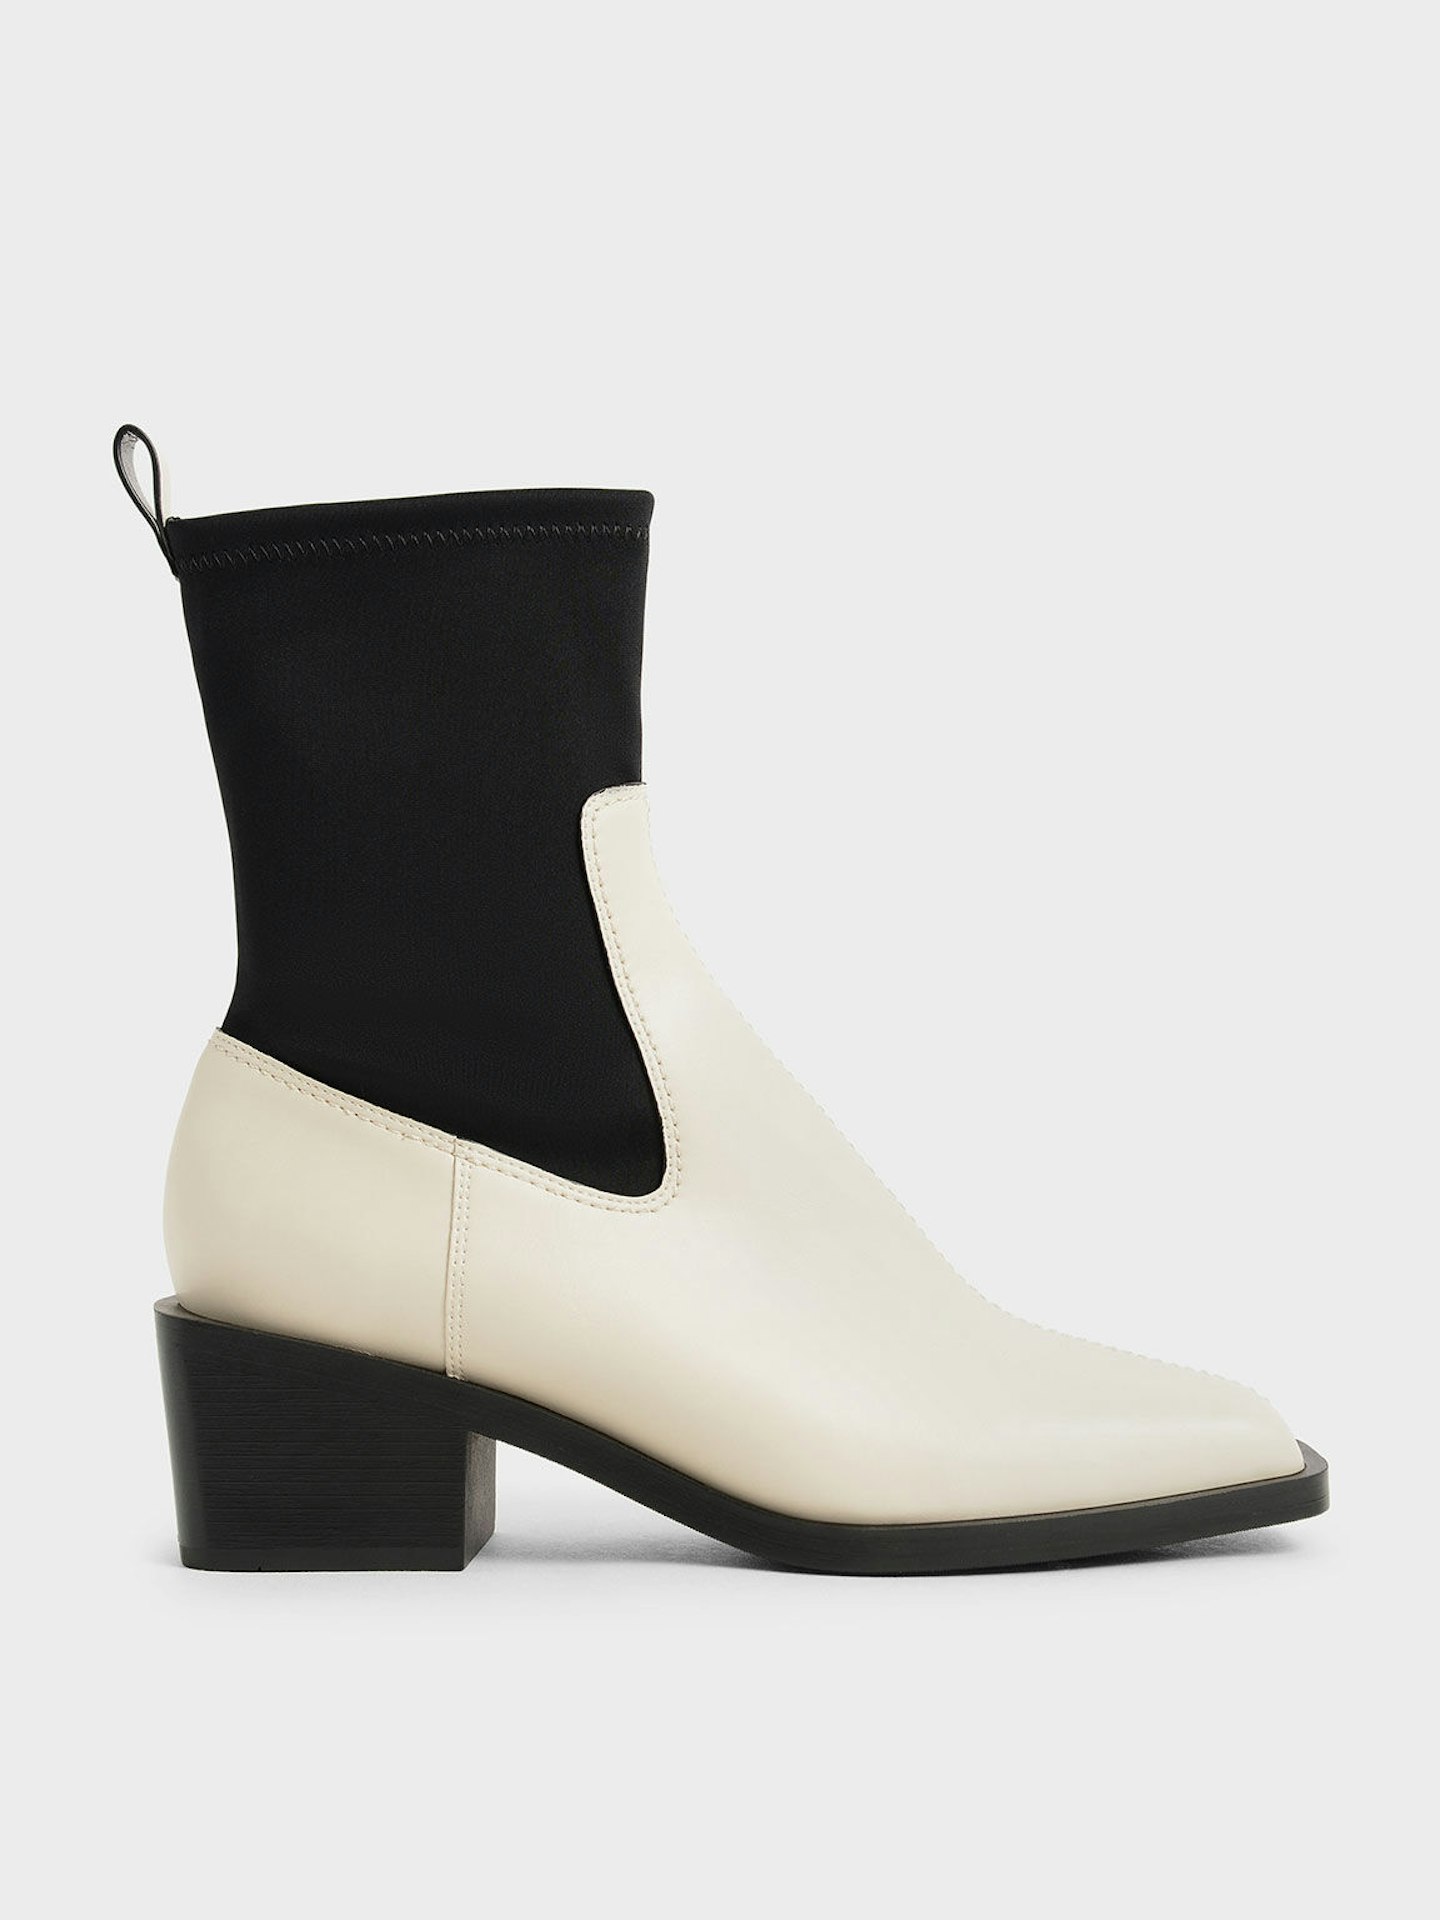 Sienna Miller Charles and Keith boots  Two-Tone Sock Boots, WAS £65 NOW £53